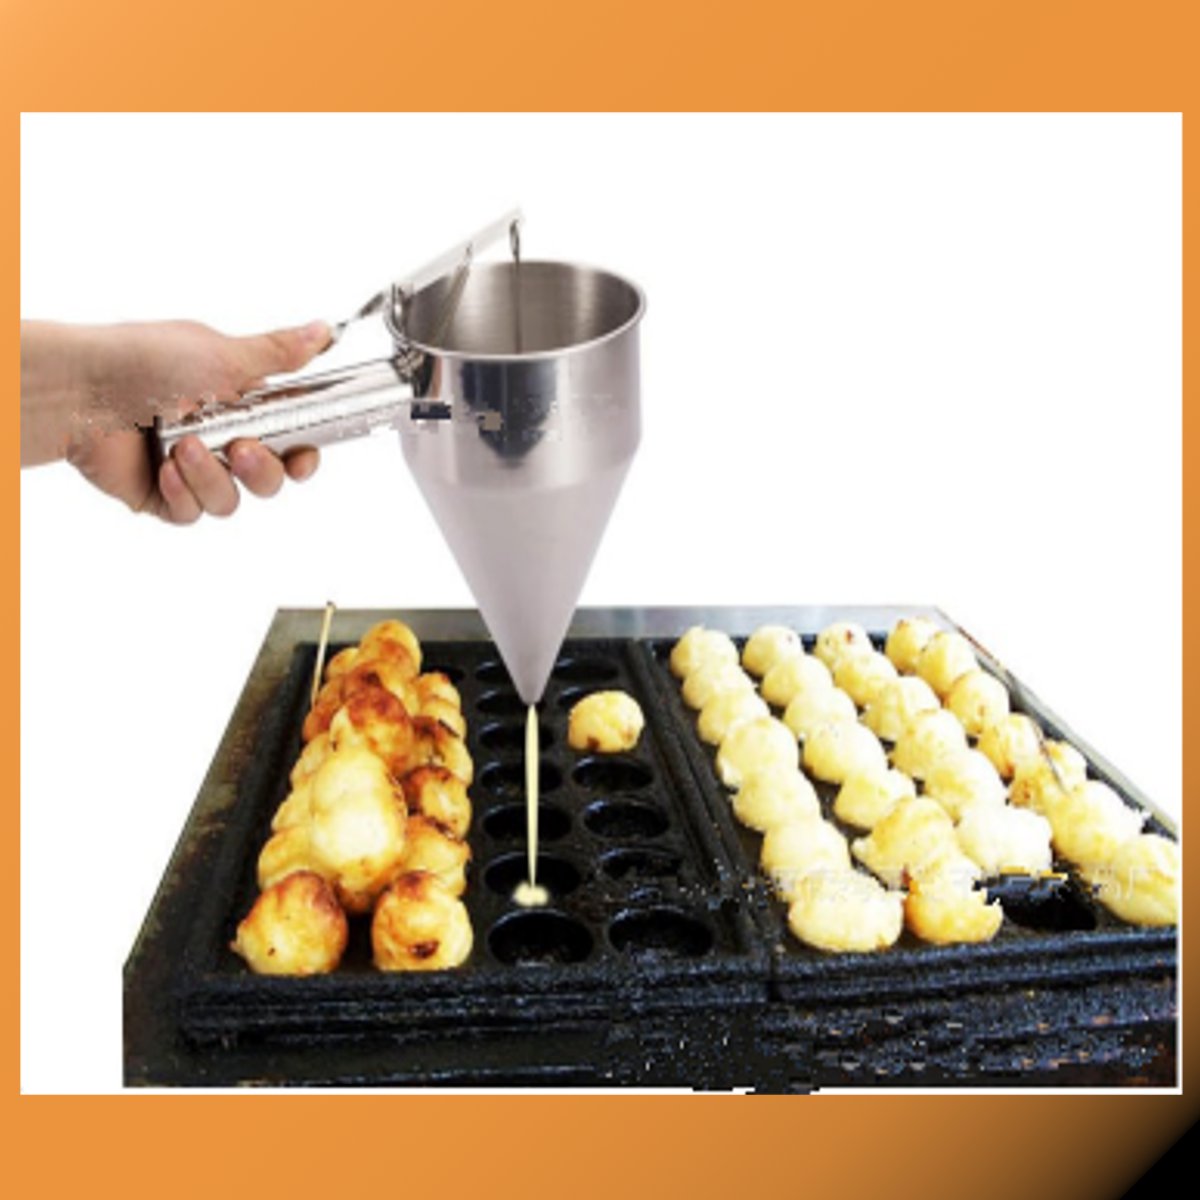 Find Imbuto conico Imbuto Utensili in acciaio inox Octopus Fish Balls Kitchen Tool for Sale on Gipsybee.com with cryptocurrencies